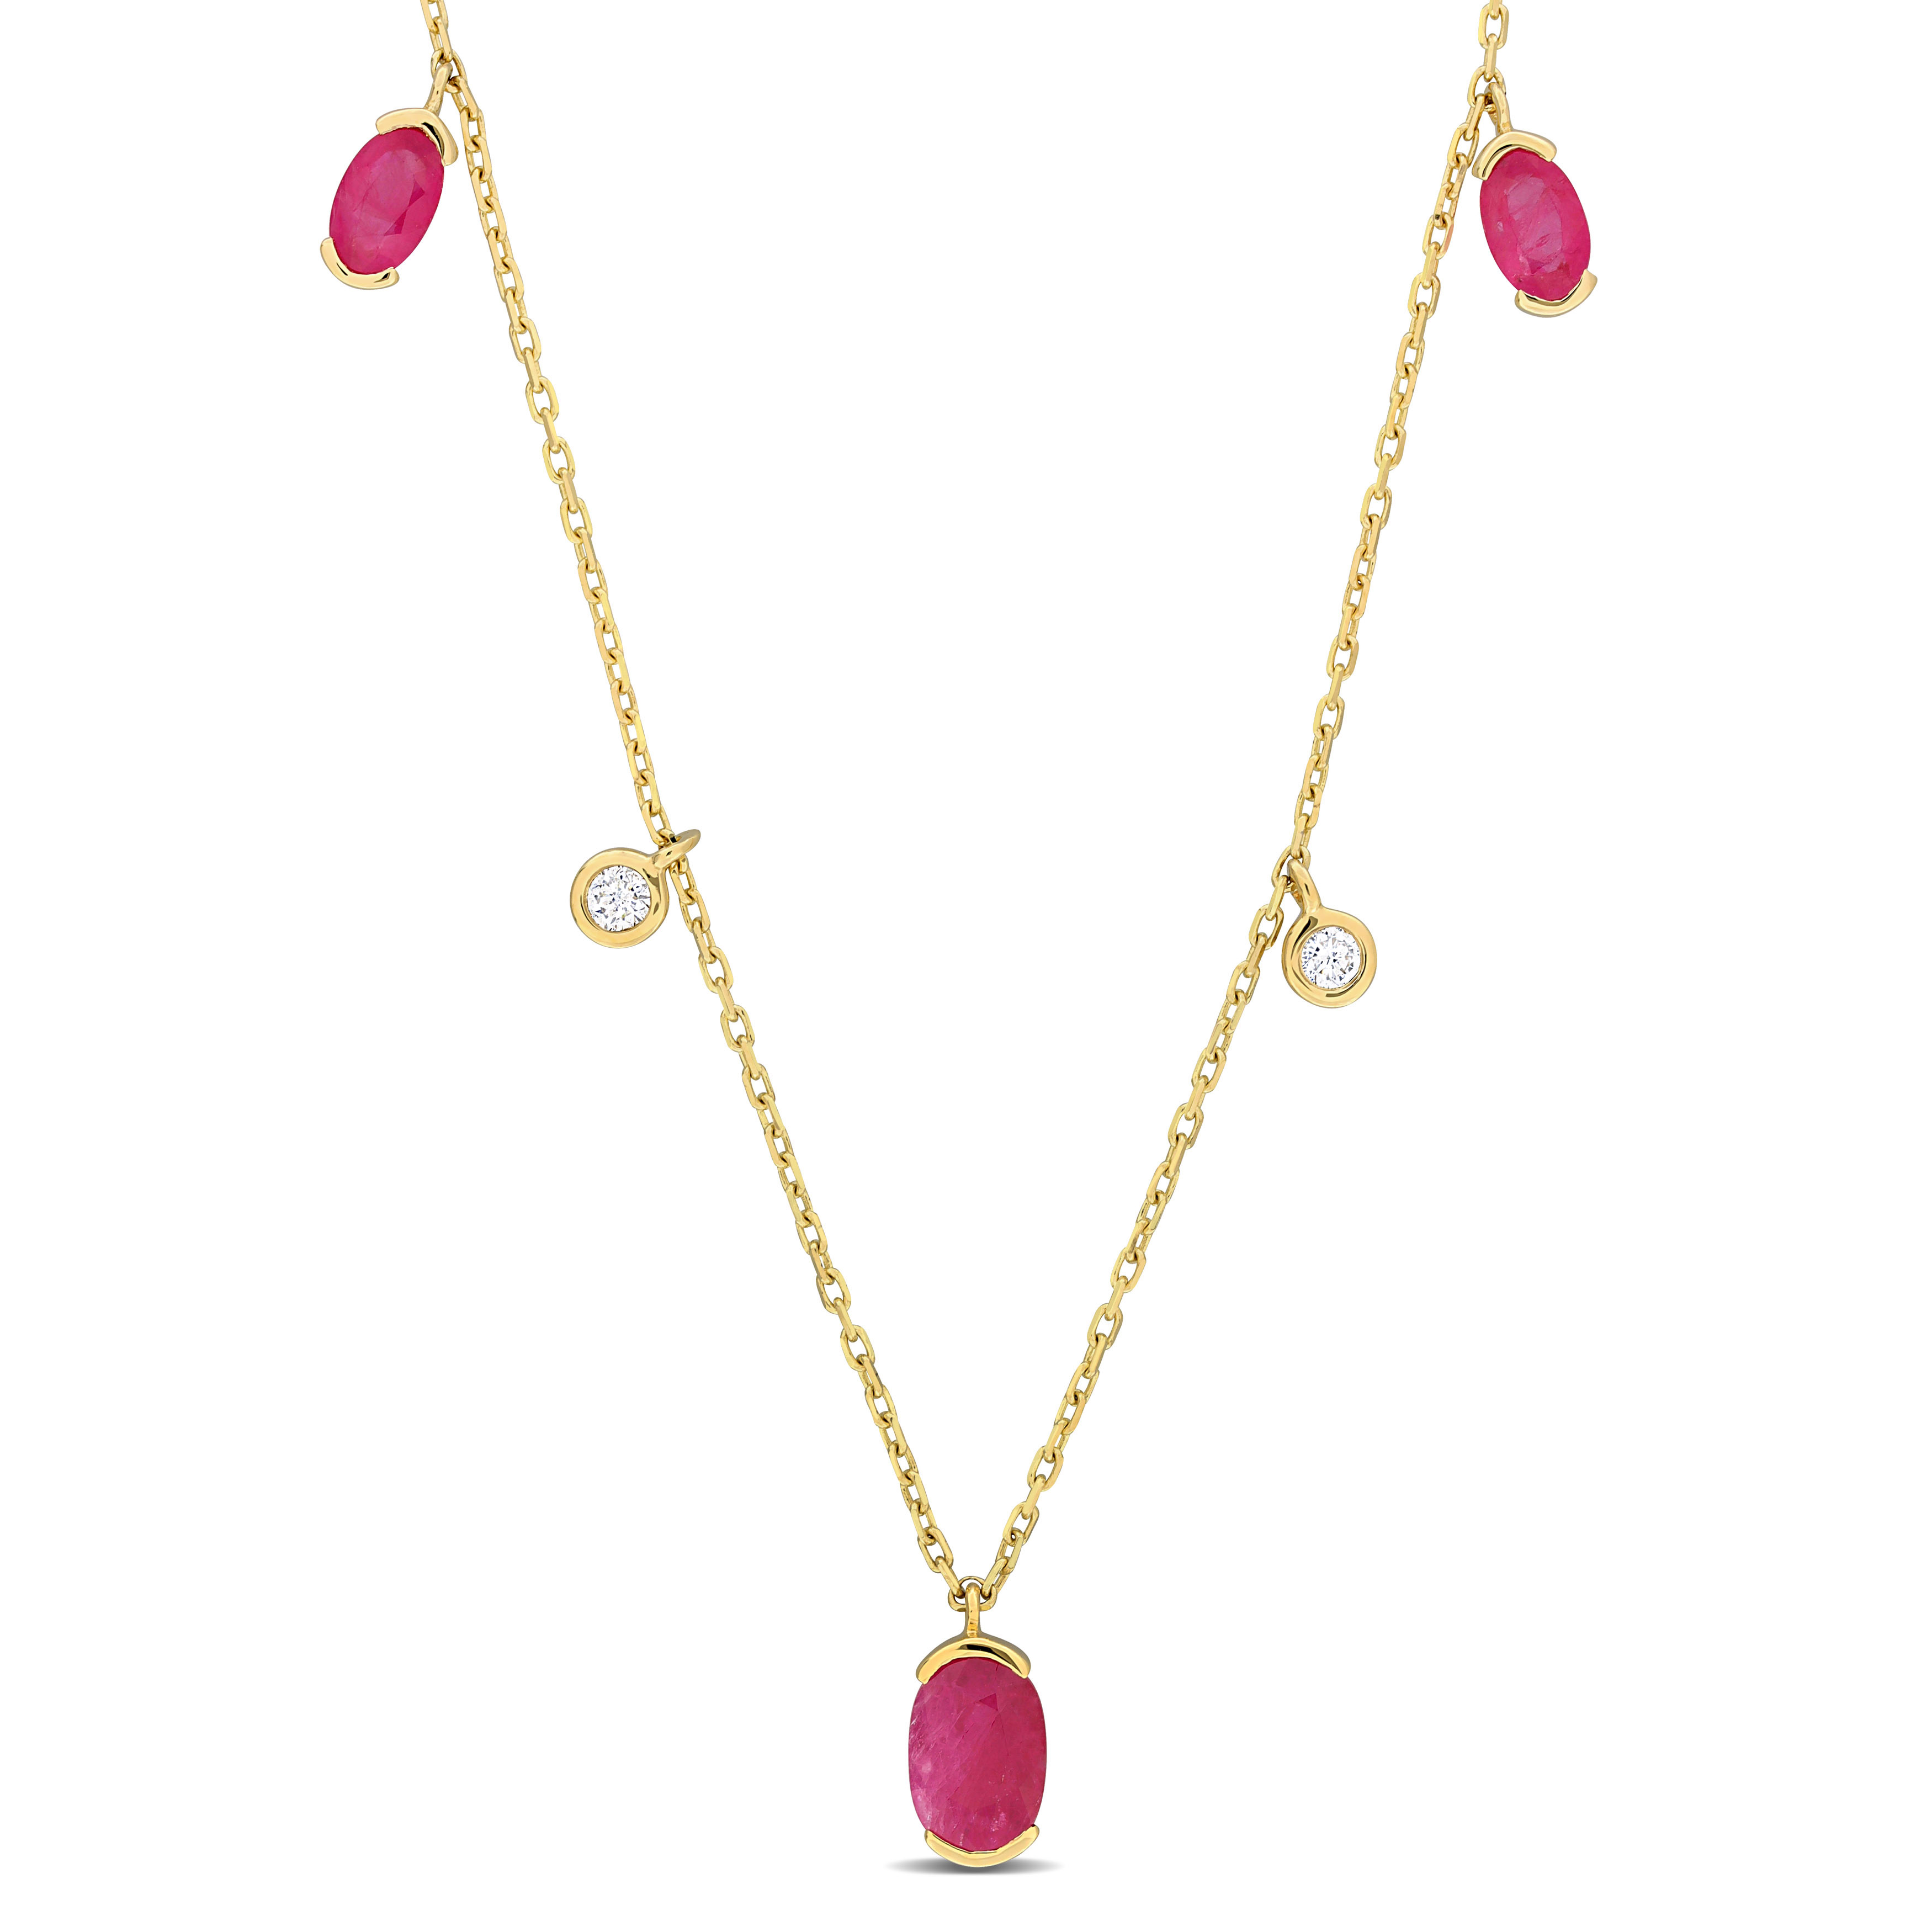 1 1/10 CT TGW Oval Ruby & 1/10 CT TDW Diamond Station Necklace in 10k Yellow Gold - 17 in.